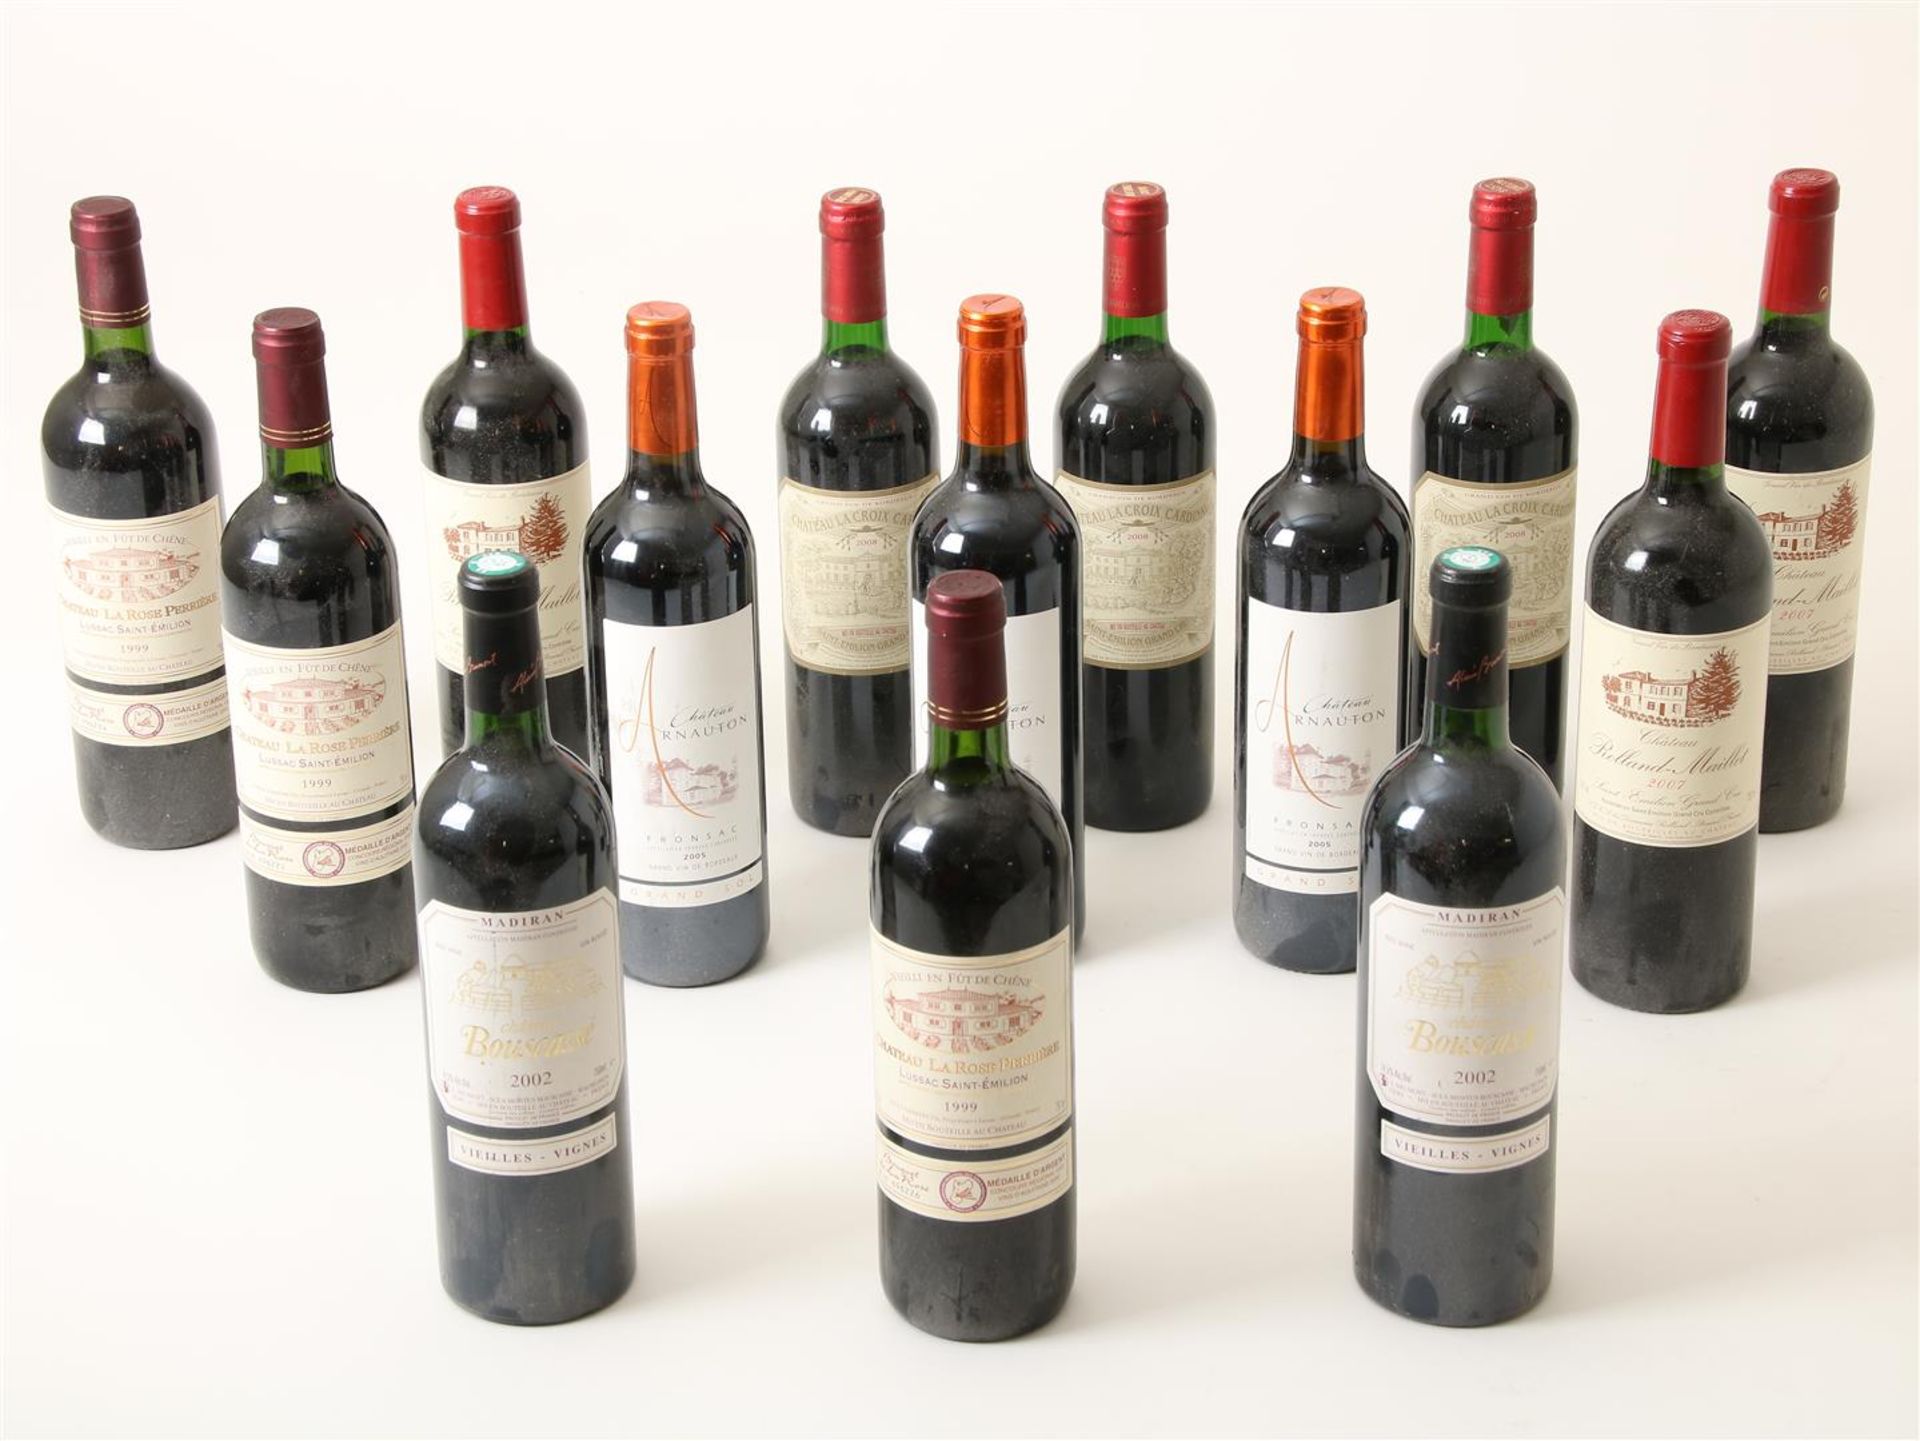 Lot of 14 wine bottles, including Chateau Arnauton 2005, Chateau La Rose Perriere 1999 and Chateau